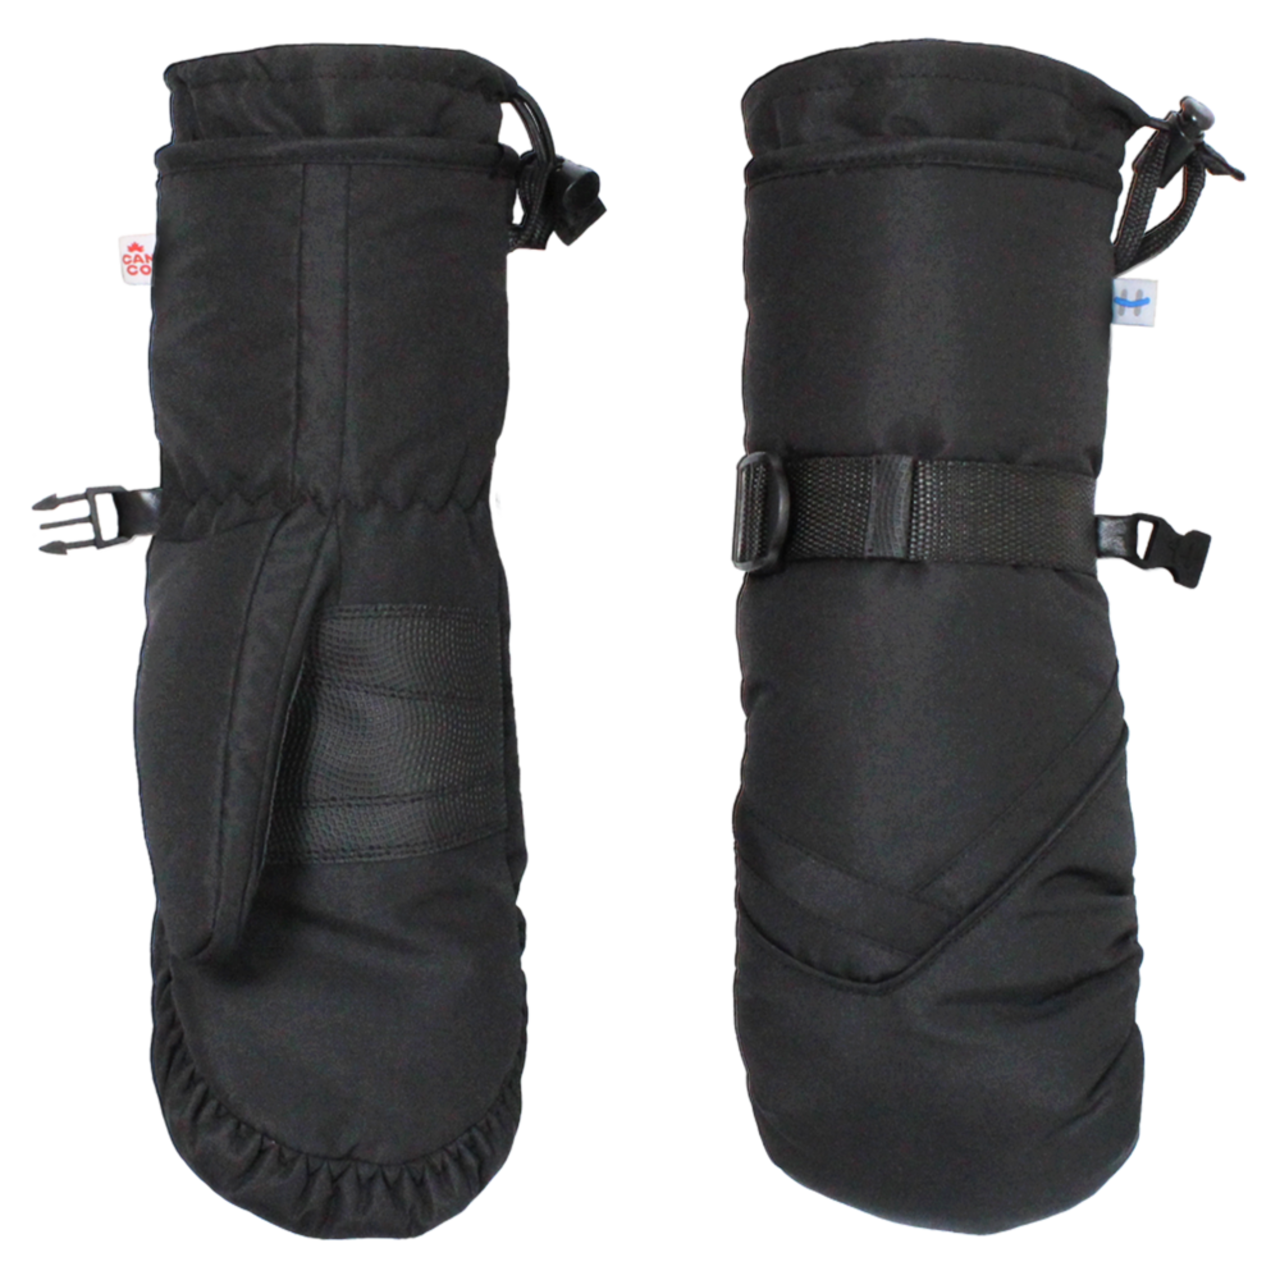 Hot Paws Women's Thermal Insulated Winter Ski Snowboard Mitts/Mittens Warm  Waterproof